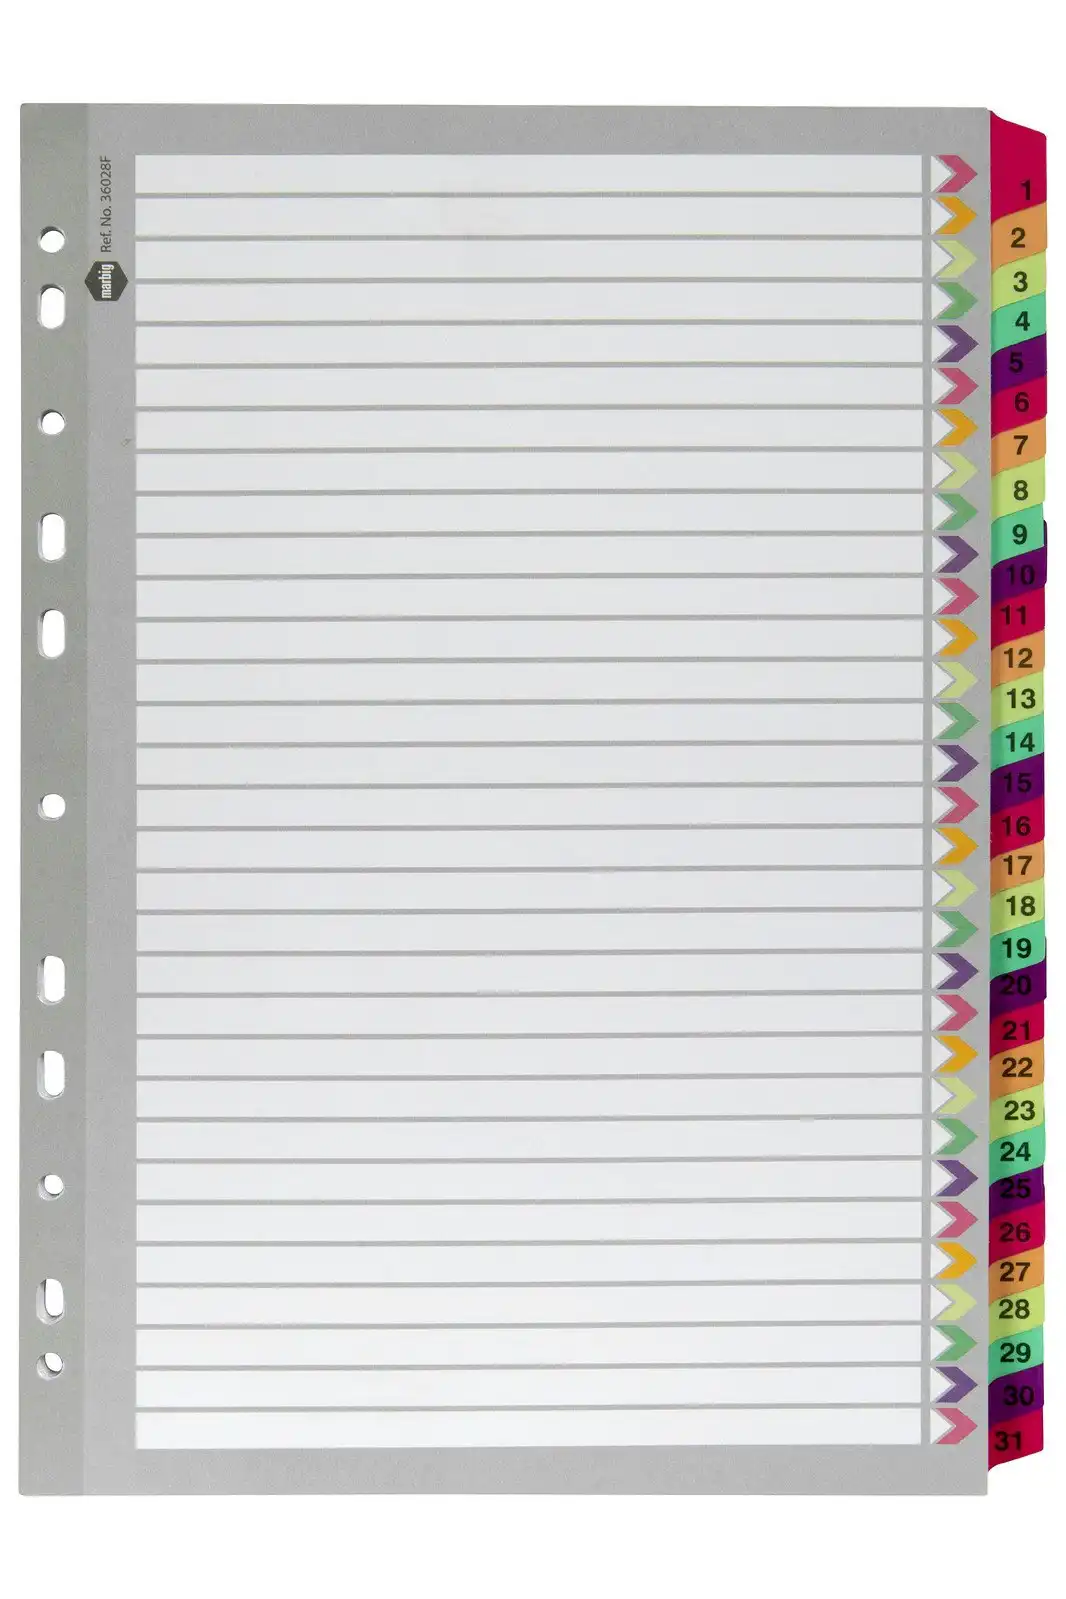 Marbig 1-31 Tab Fluoro A4 Ring Binder Plastic Divider Indices/Page Organiser